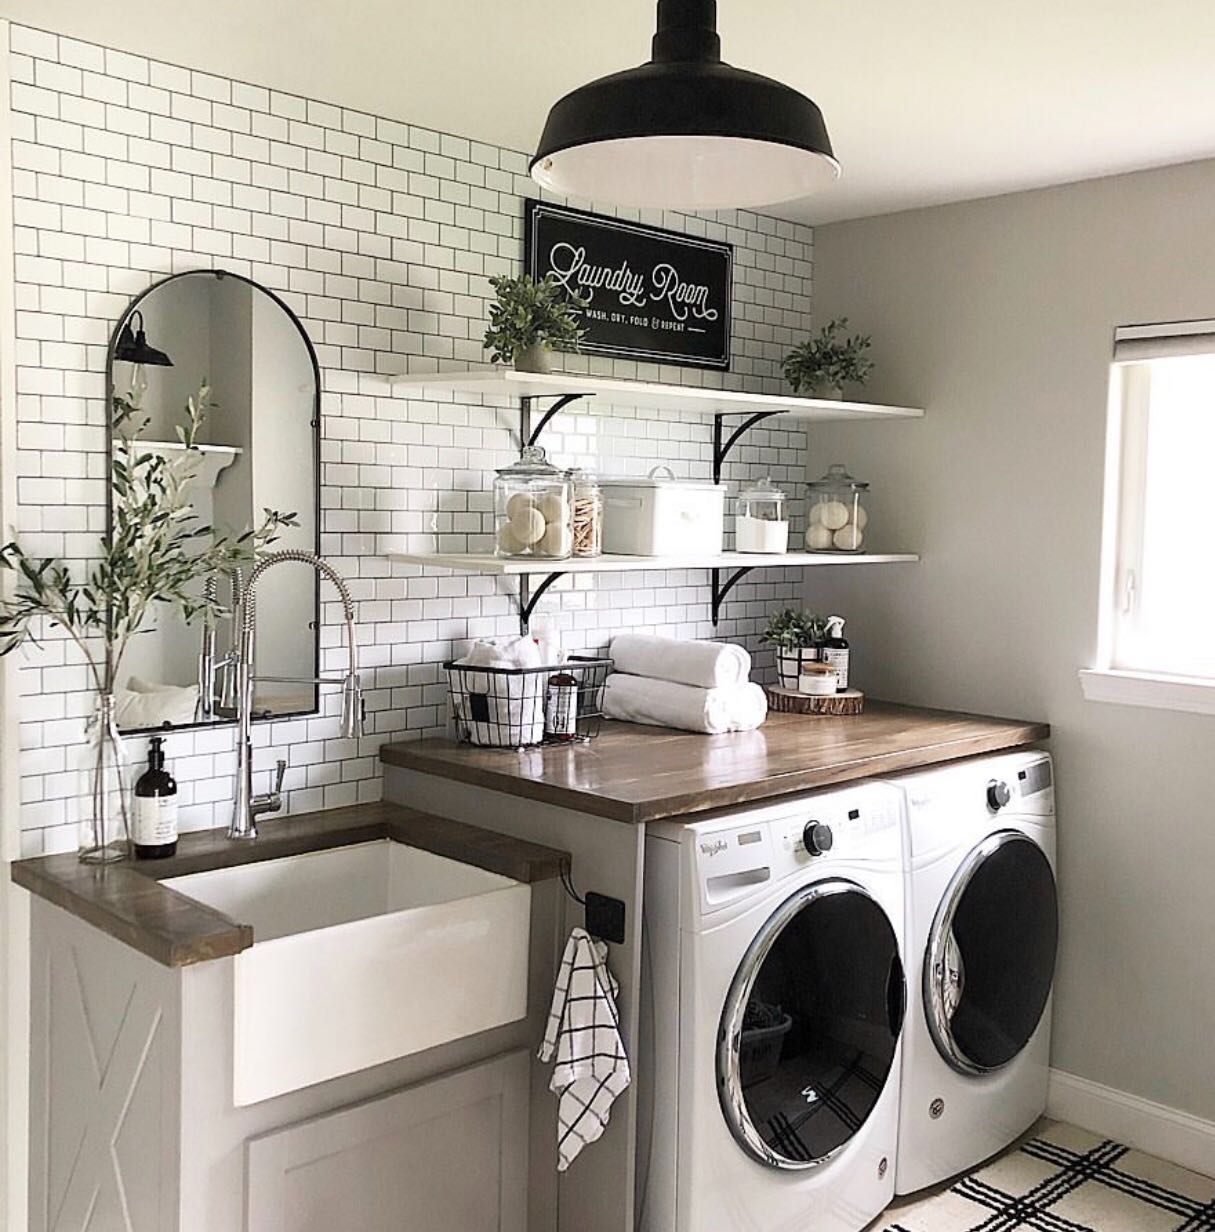 Laundry Room Decorating Ideas On A Budget - Small Laundry Room Ideas ...